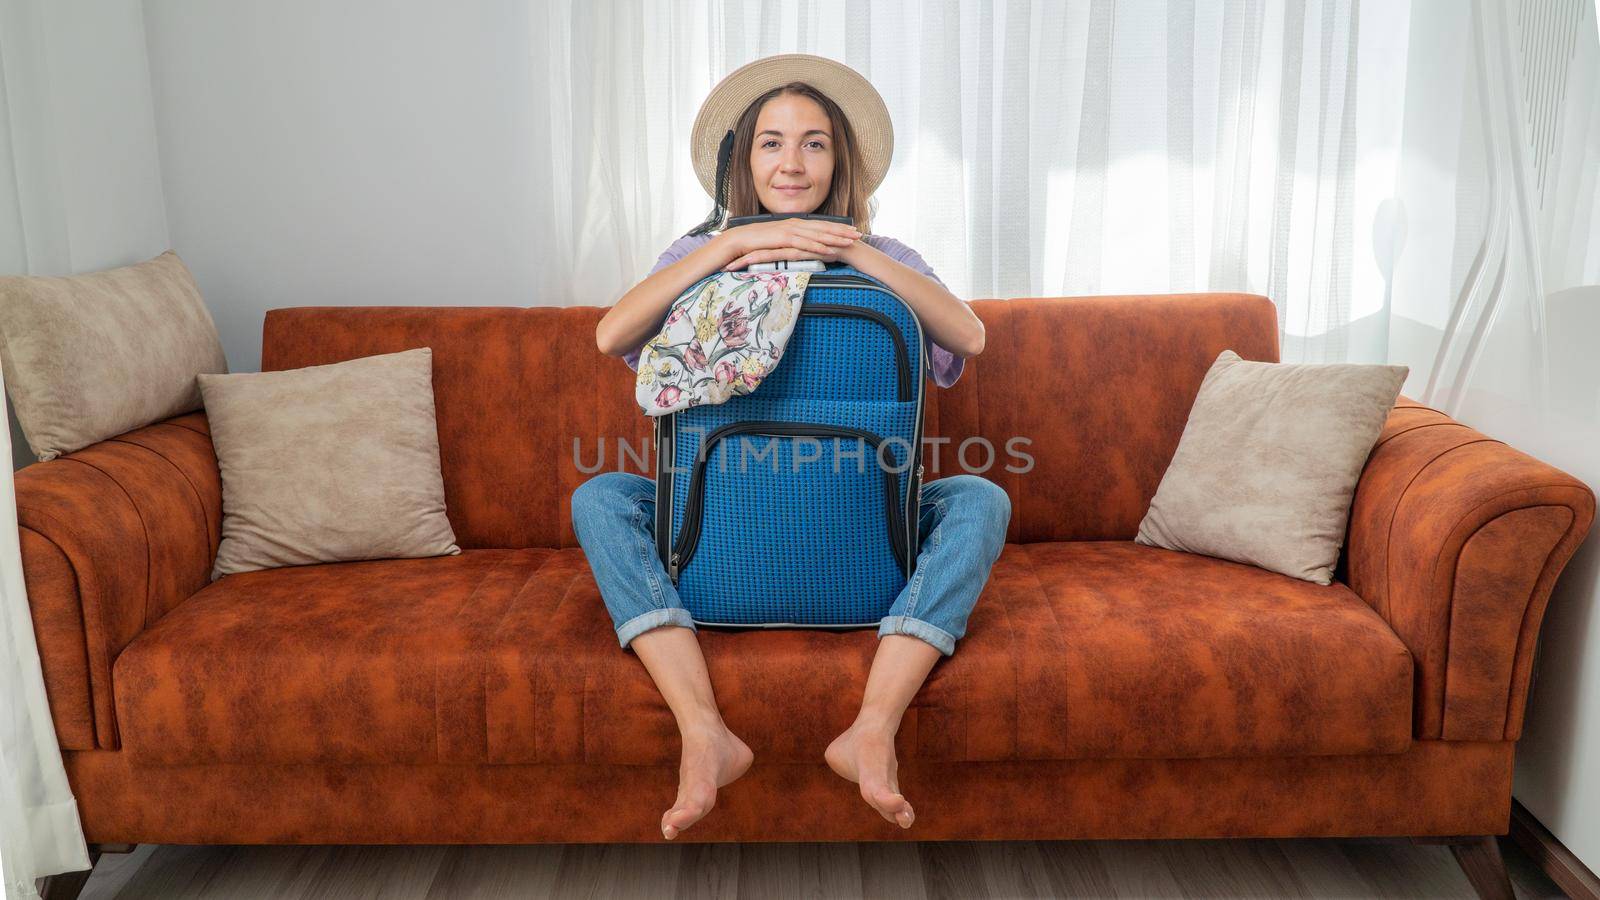 A satisfied woman with a packed suitcase on the couch, ready to travel. High quality photo